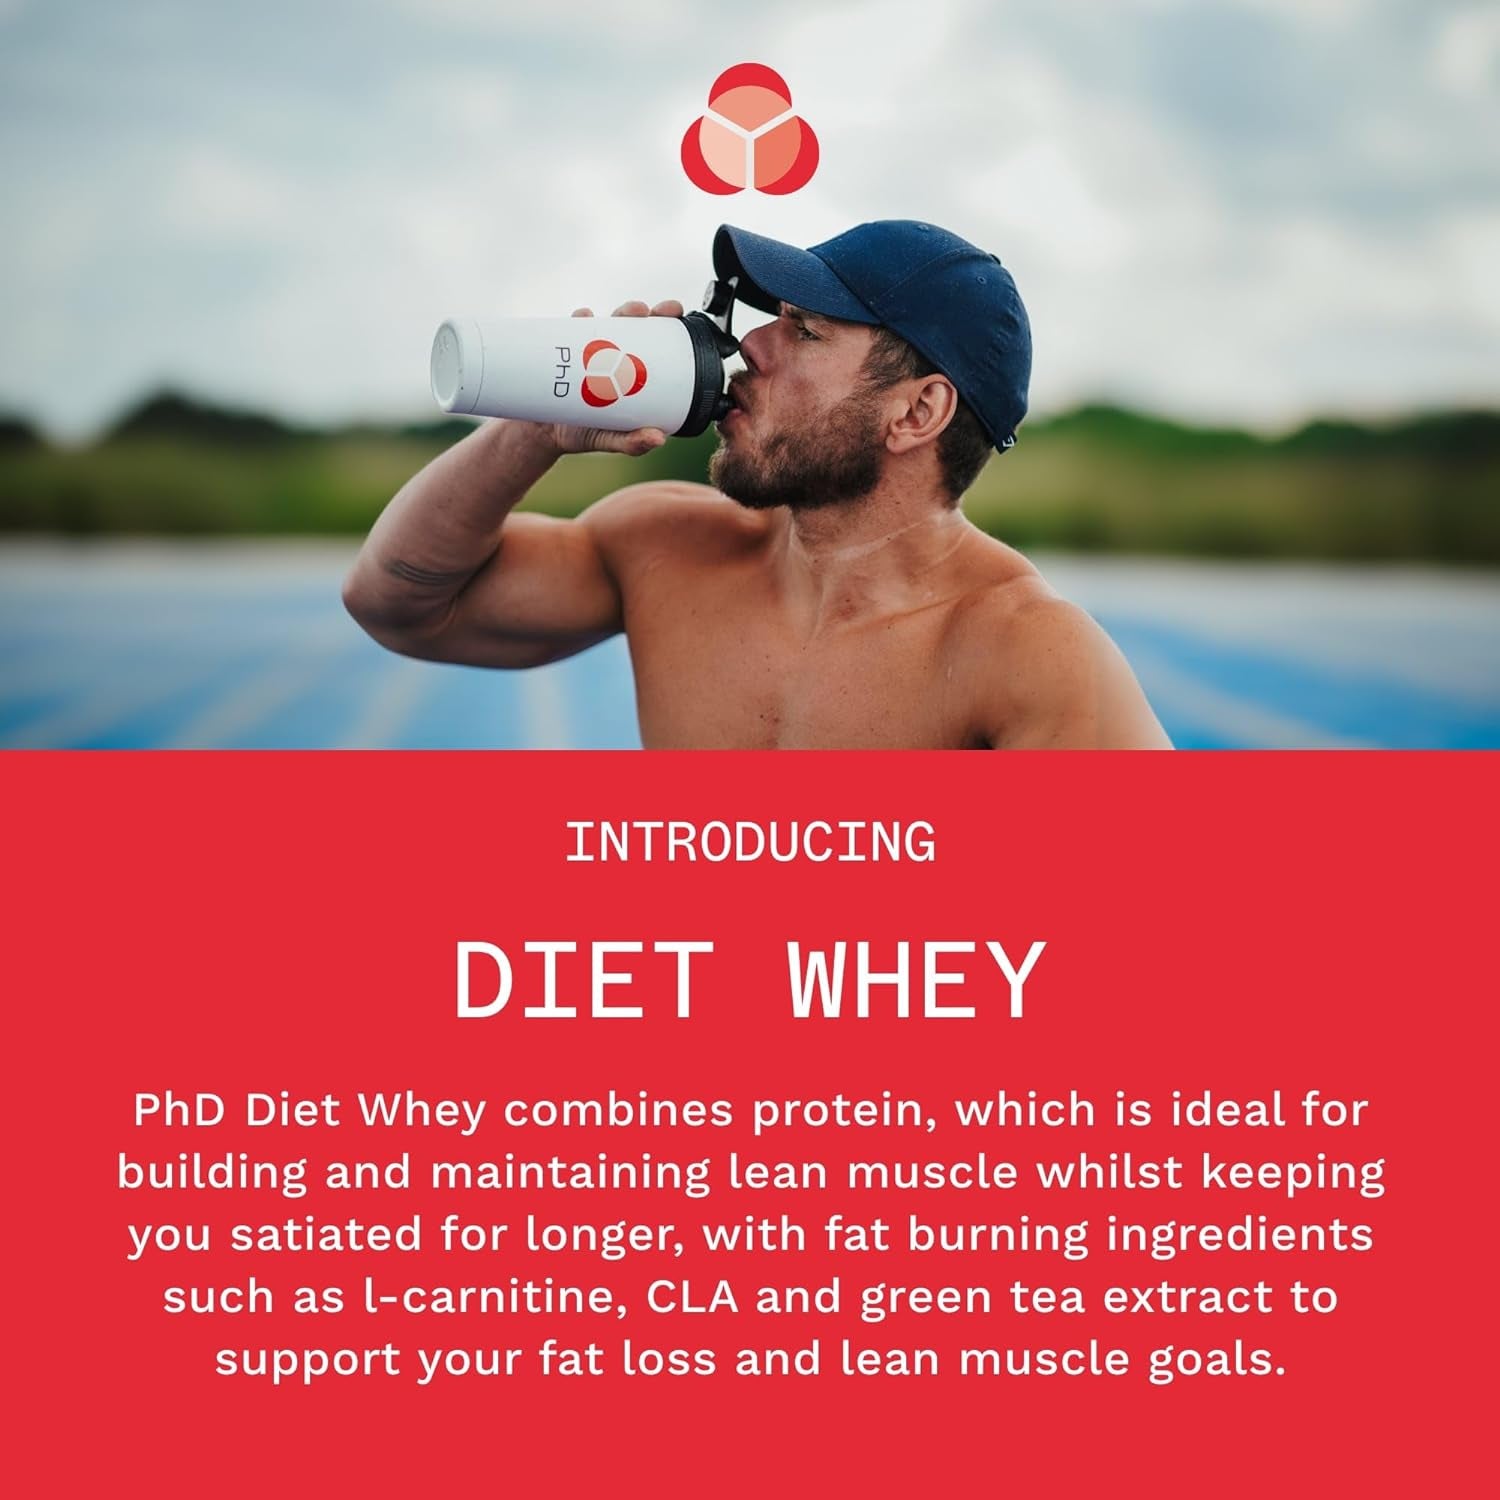 Nutrition Diet Whey Low Calorie Protein Powder, Low Carb, High Protein Lean Matrix, Chocolate Peanut Butter Protein Powder, High Protein, 40 Servings per 1 Kg Bag